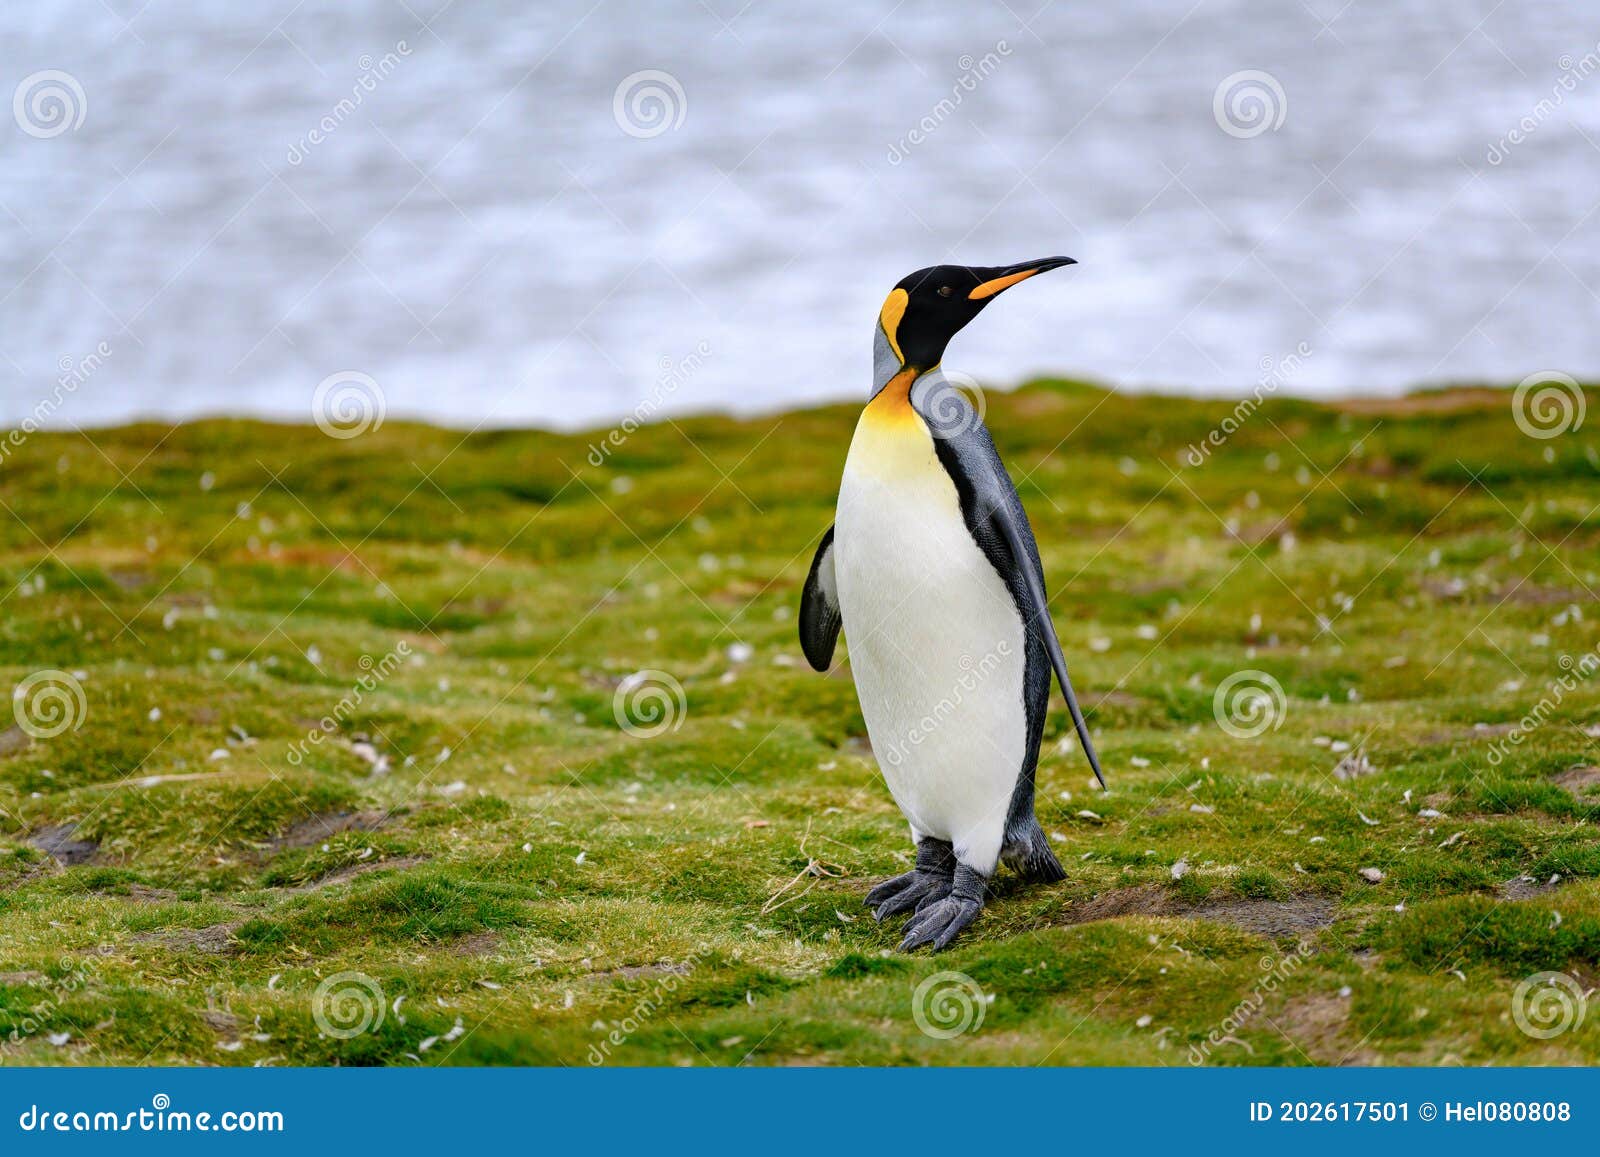 king penguin - aptendytes patagonica - standing on grass in front of beach, gold harbour, south georgia